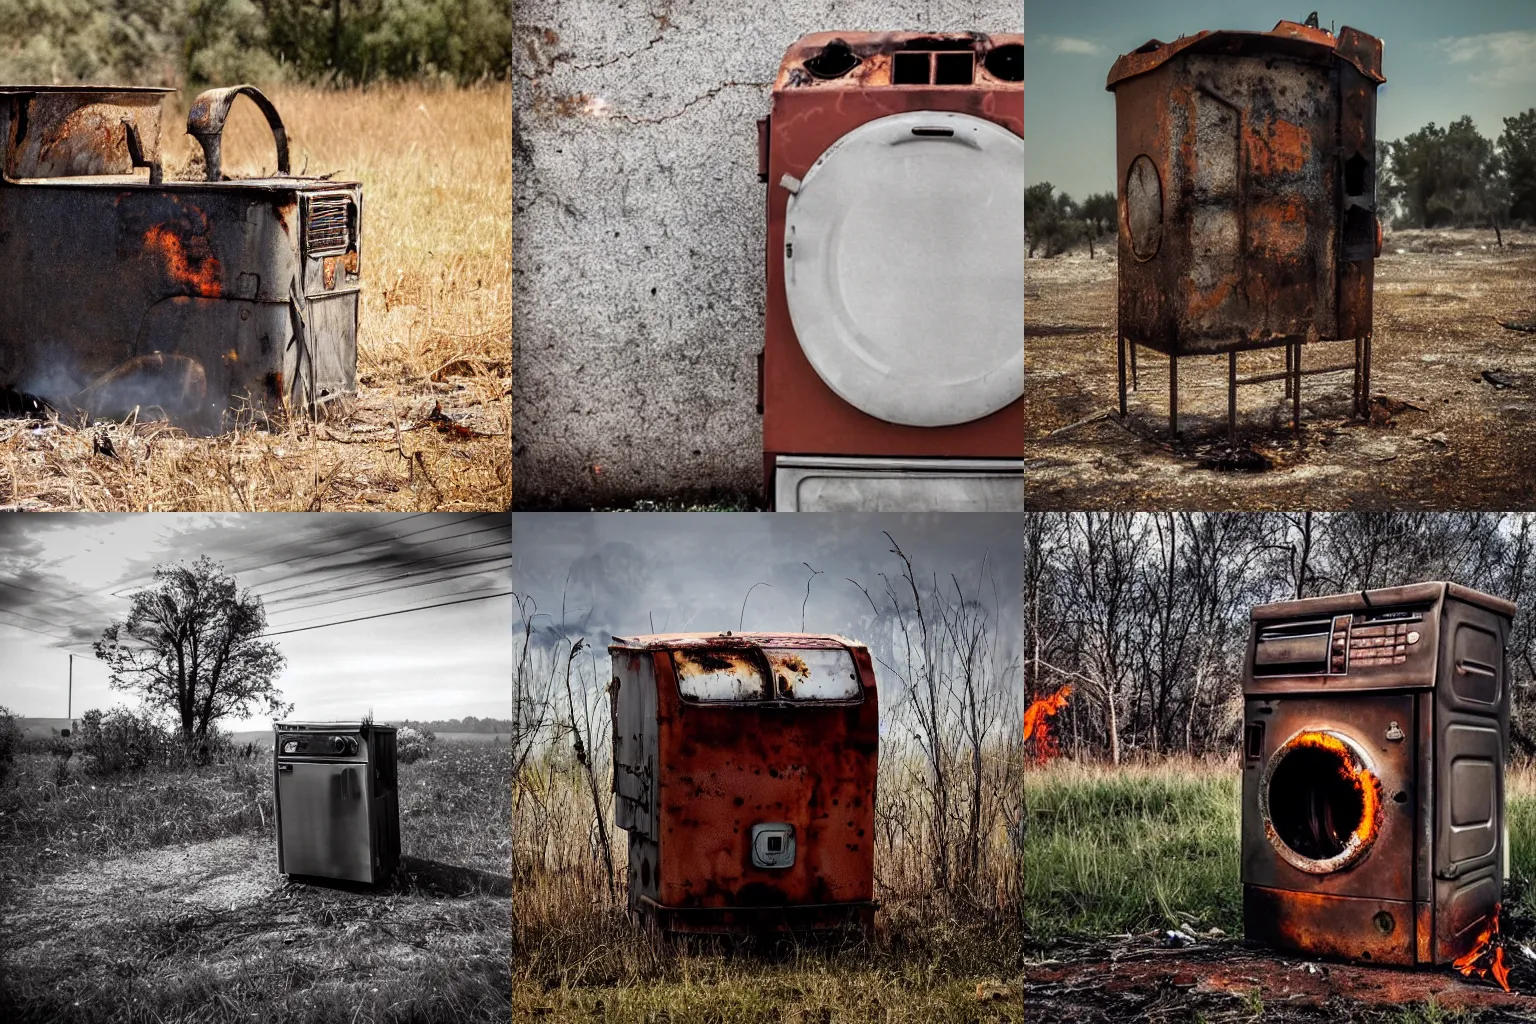 Prompt: a photo of a burning rusted washing machine im flames that is on fire standing in a dried out field